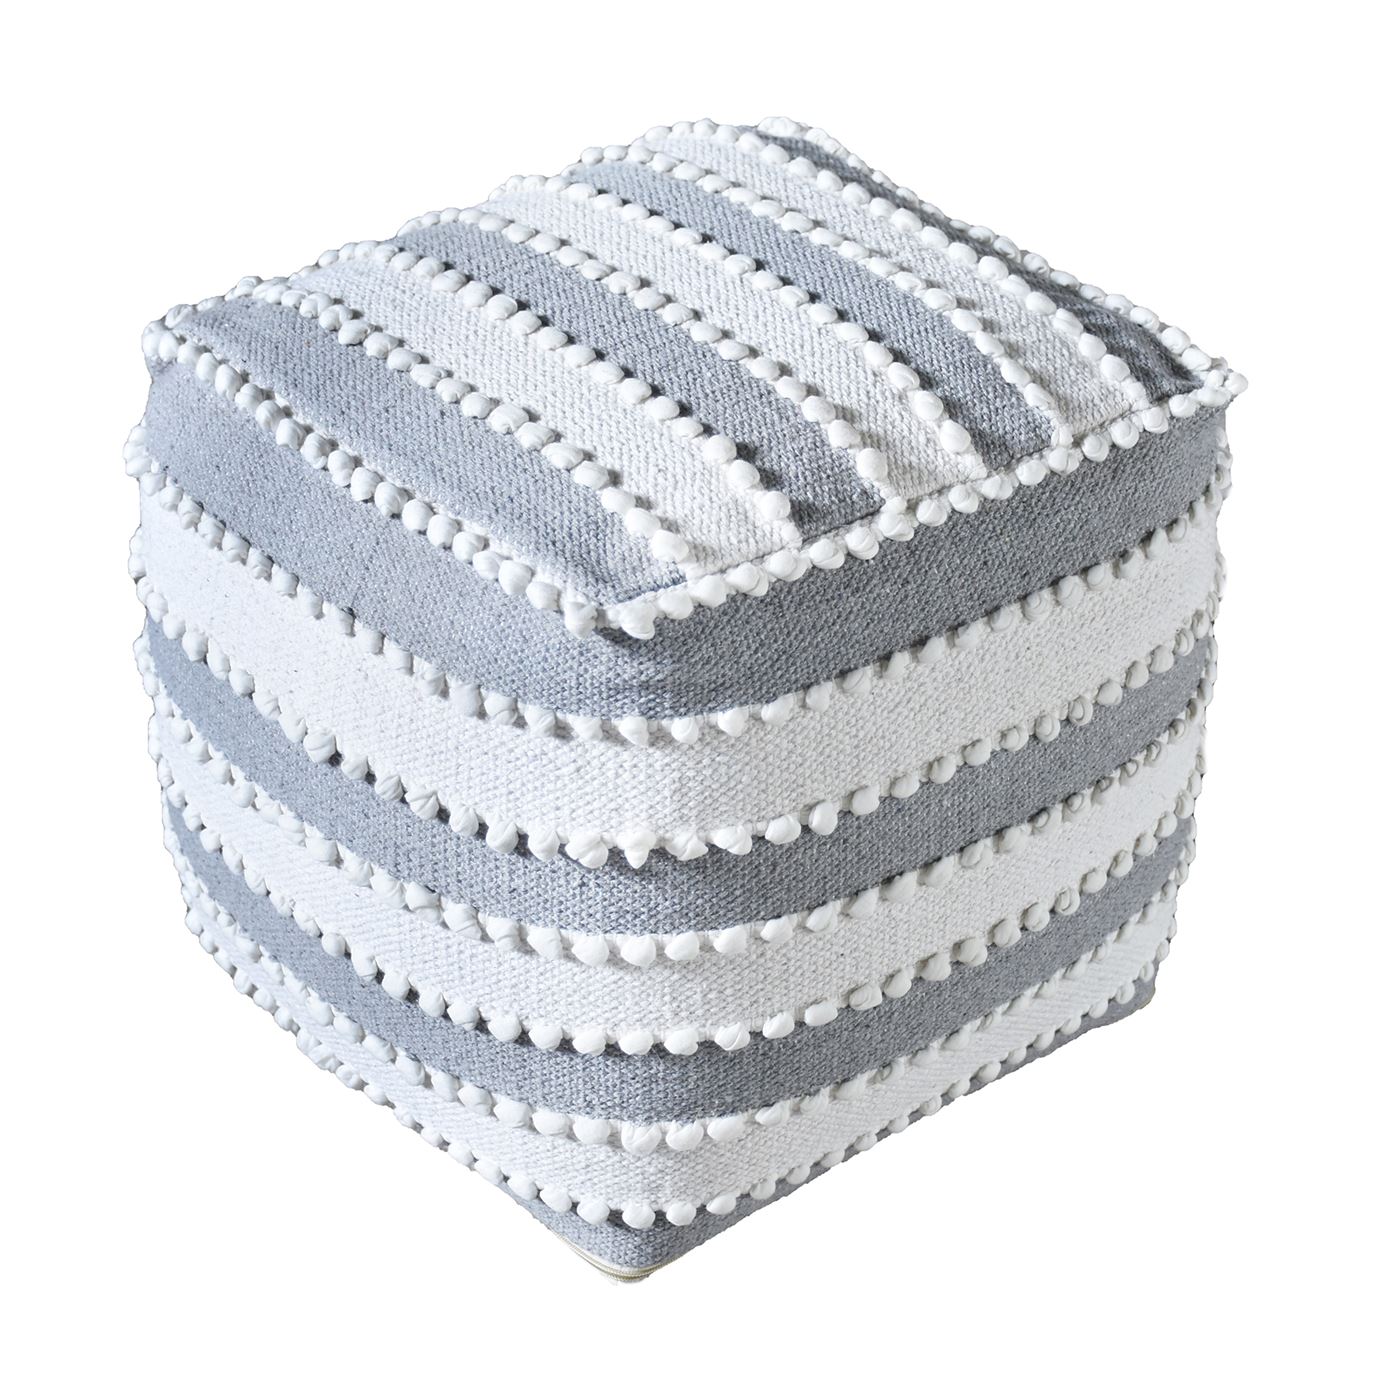 Forster Pouf, Cotton, Viscose Rag, Natural White, Grey, Pitloom, All Loop